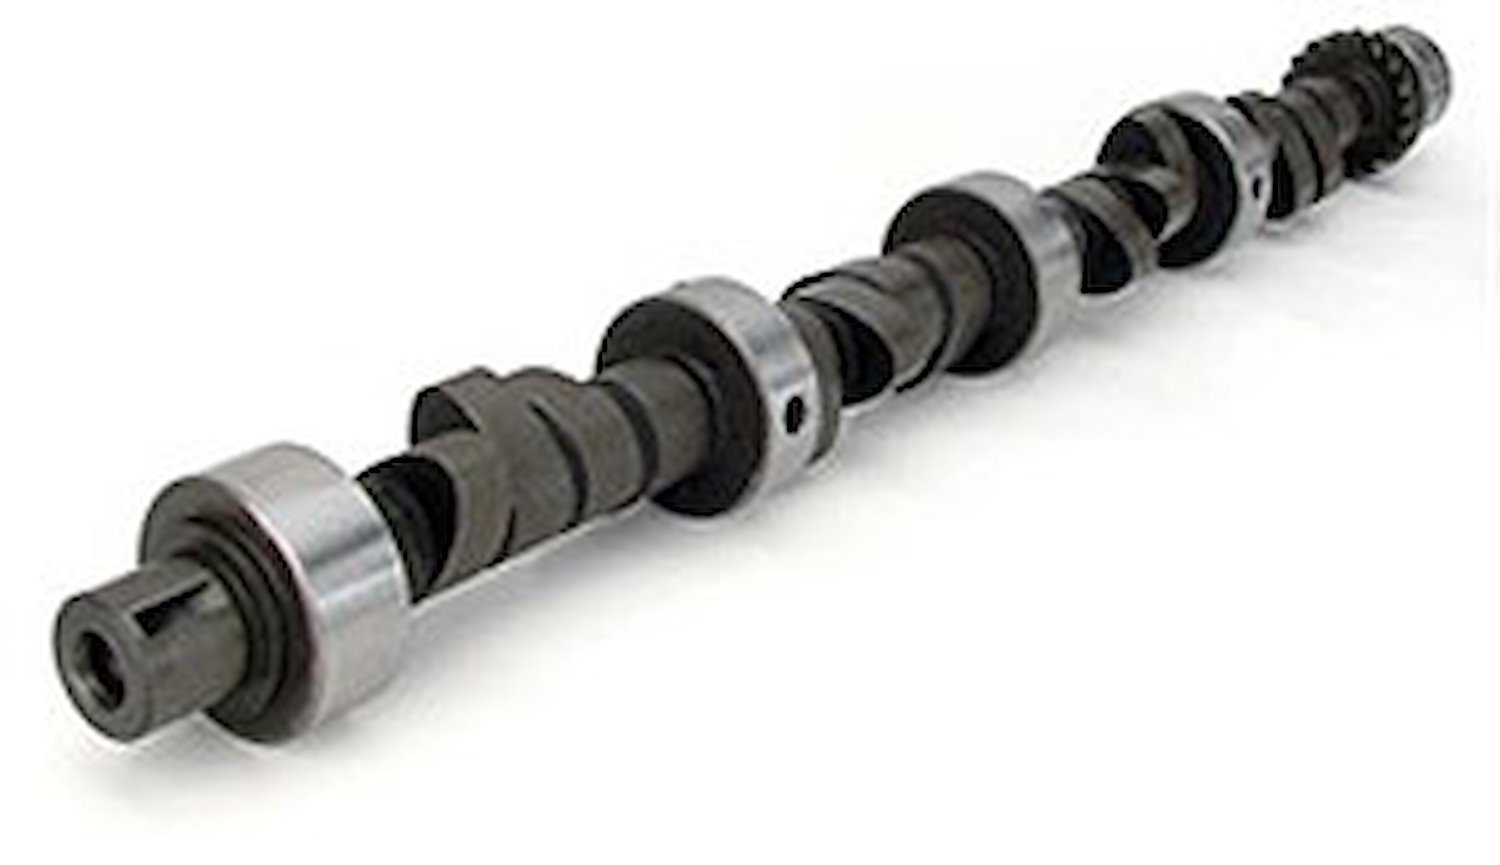 Xtreme Energy 262H Hydraulic Flat Tappet Camshaft Only Lift .462"/.470" Duration 262°/270° RPM Range 1300-5600